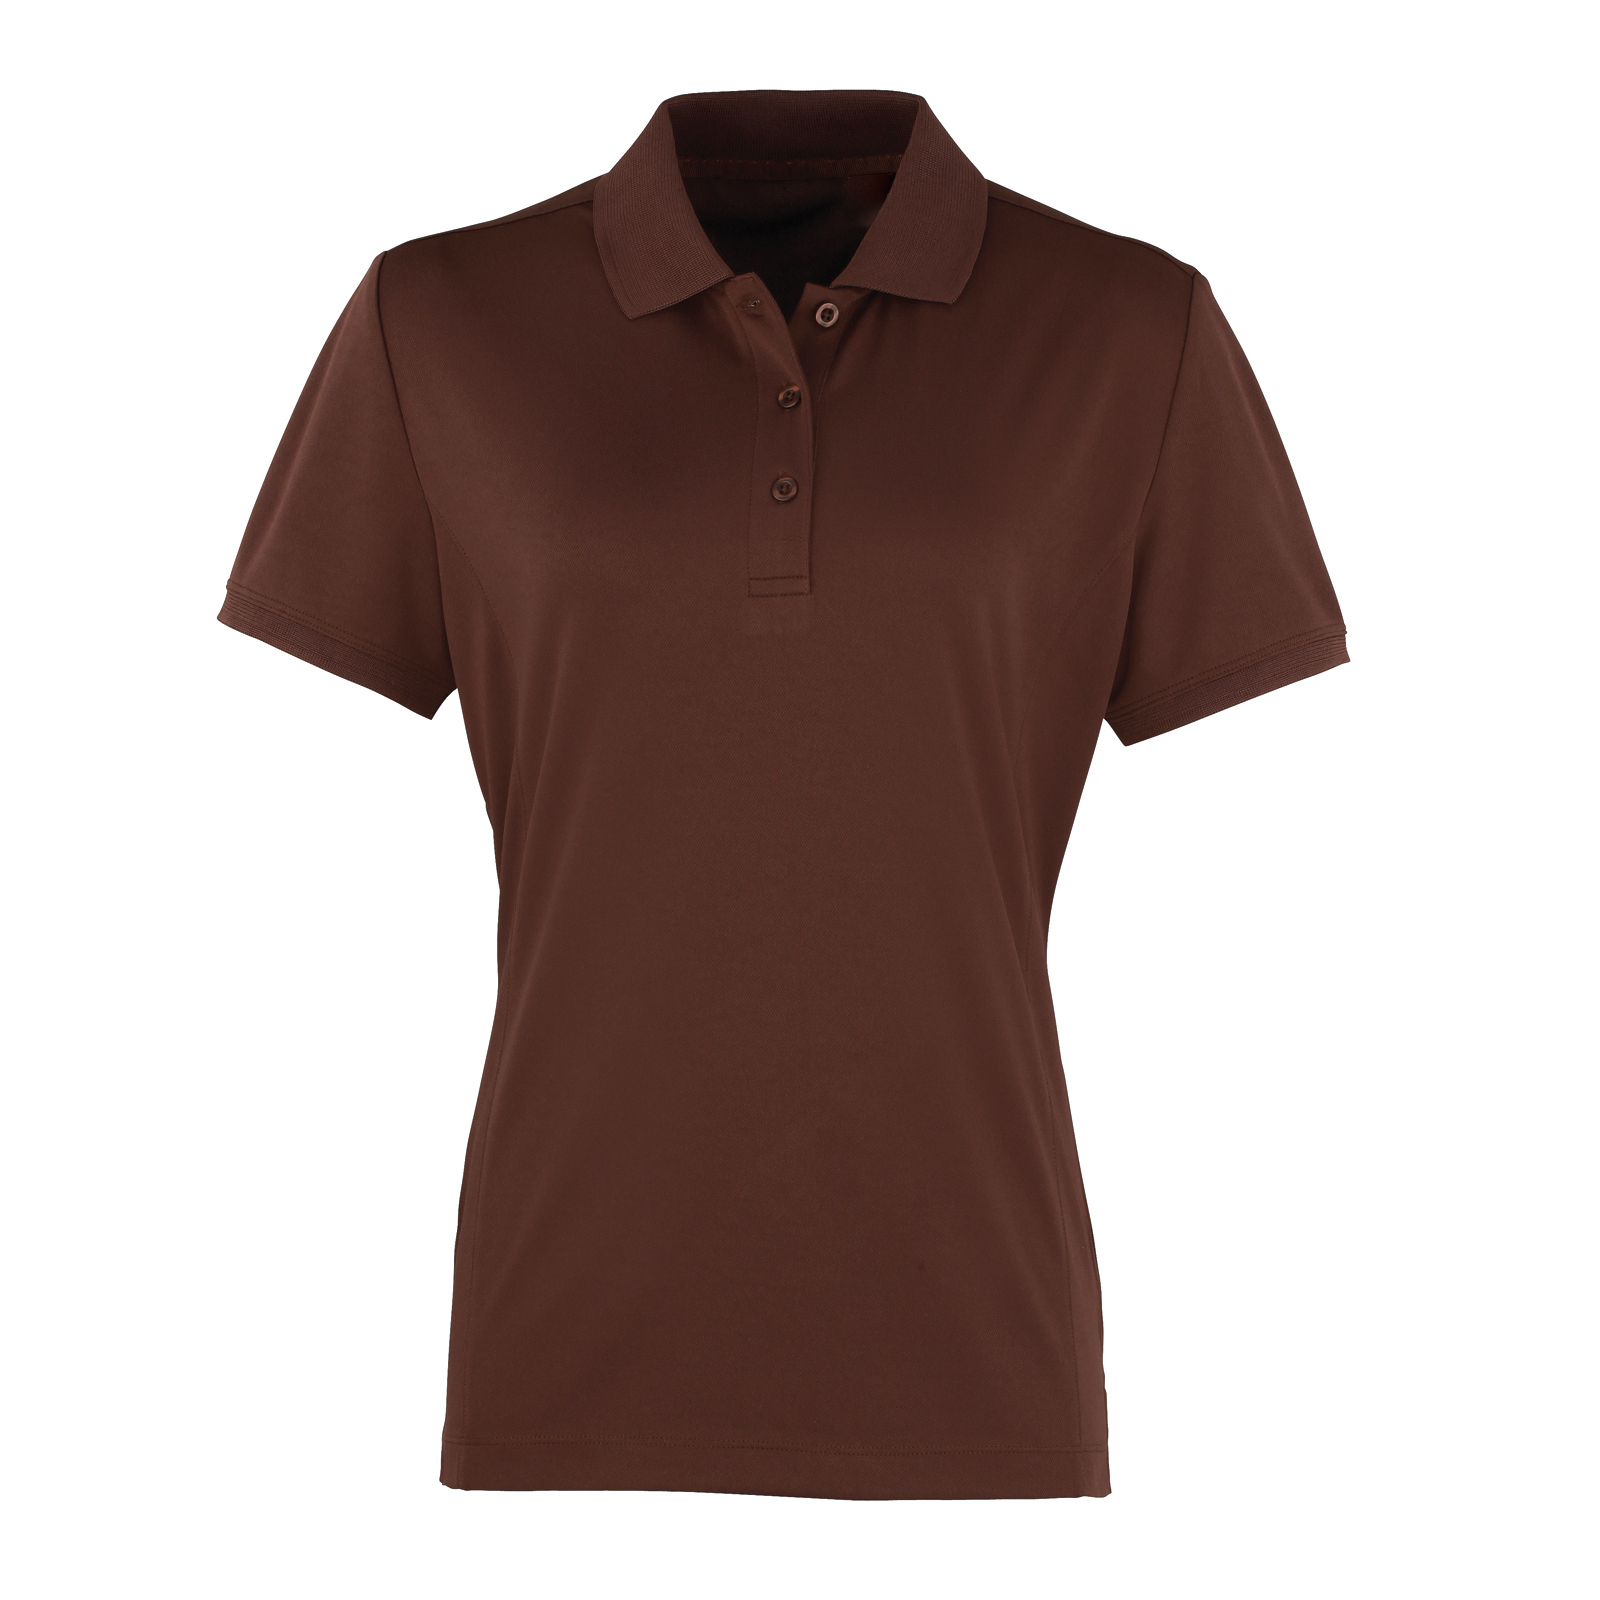 ax-httpswebsystems.s3.amazonaws.comtmp_for_downloadpremier-ladies-coolchecker-pique-polo-brown.jpg